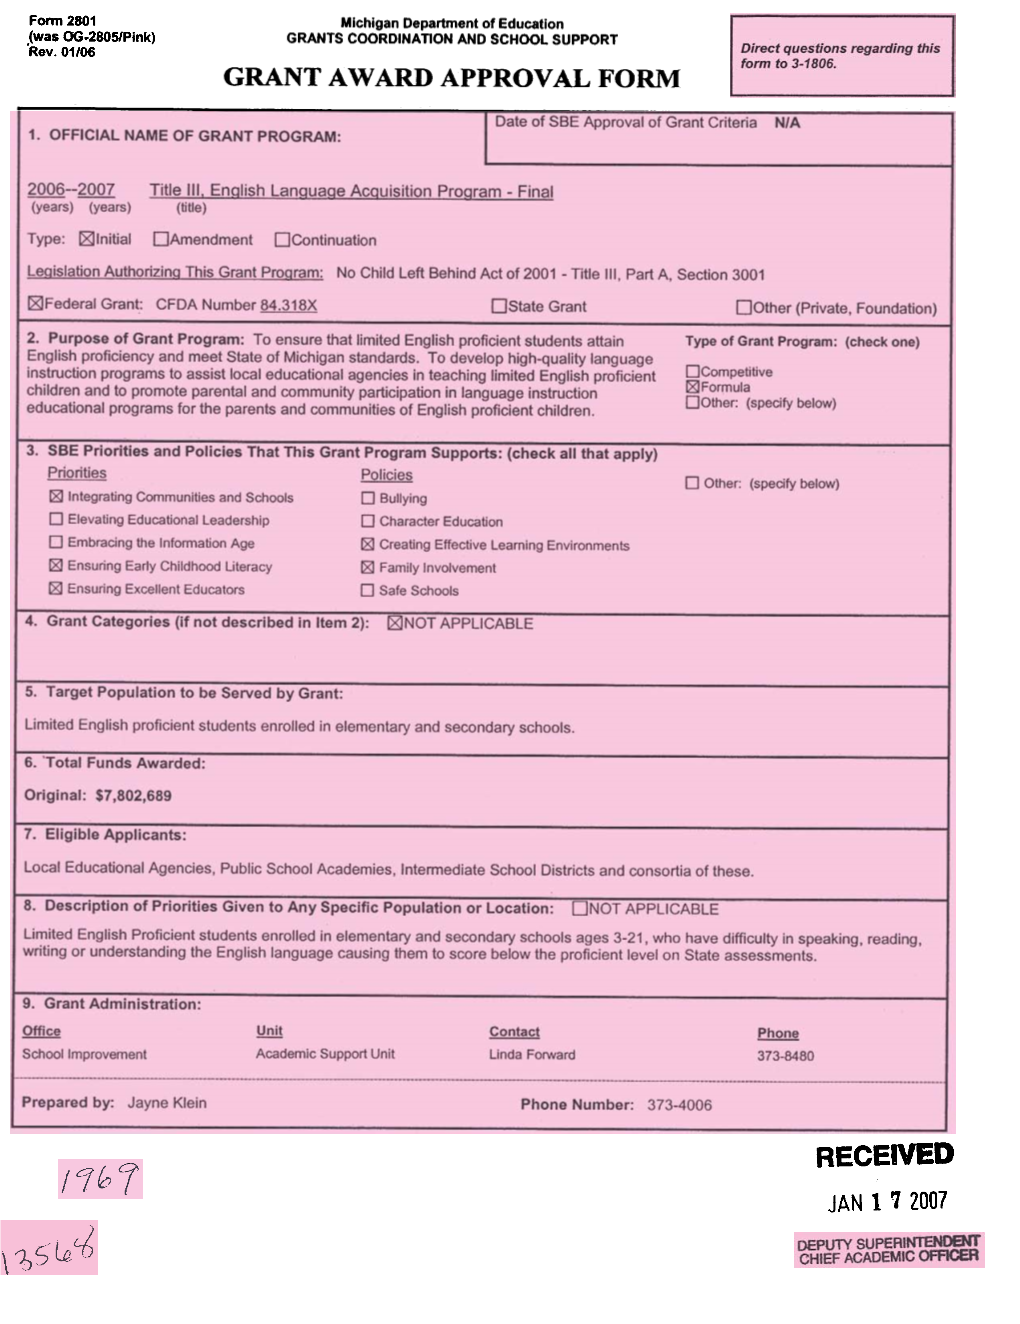 Grant Award Approval Form (Pink), Attachments,And Letters to the Grants Administration and Coordination Unit